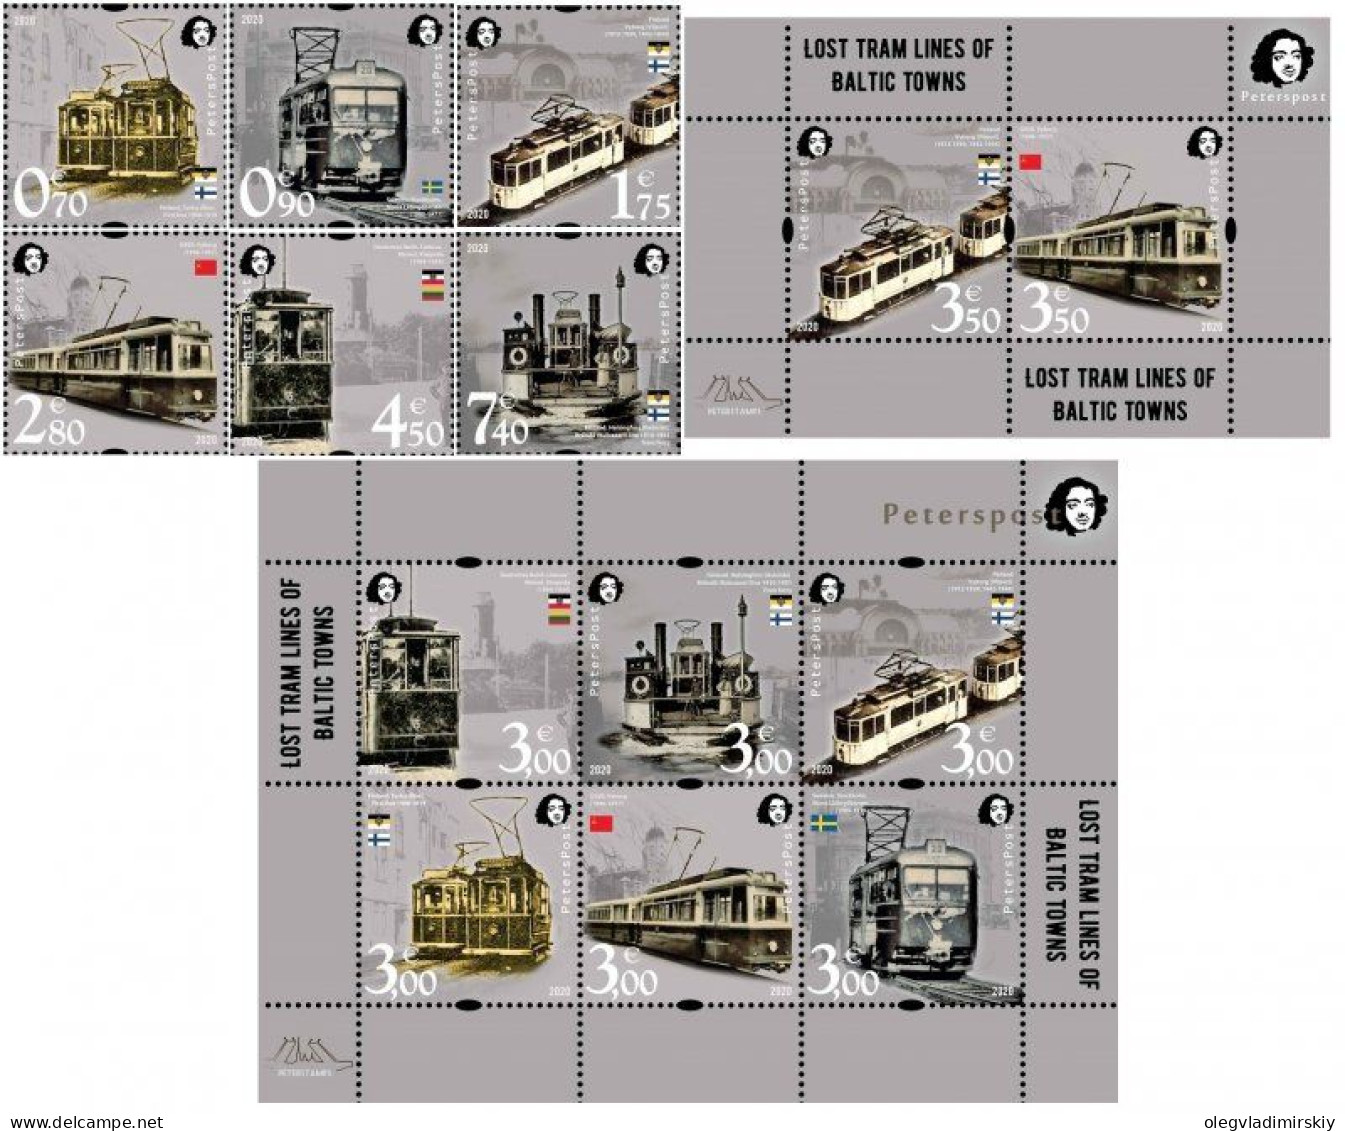 Finland Finnland Finlande 2020 Lost Tram Lines Of Baltic Towns Peterspost Complete Of Stamp Set And 2 Block's MNH - Tramways